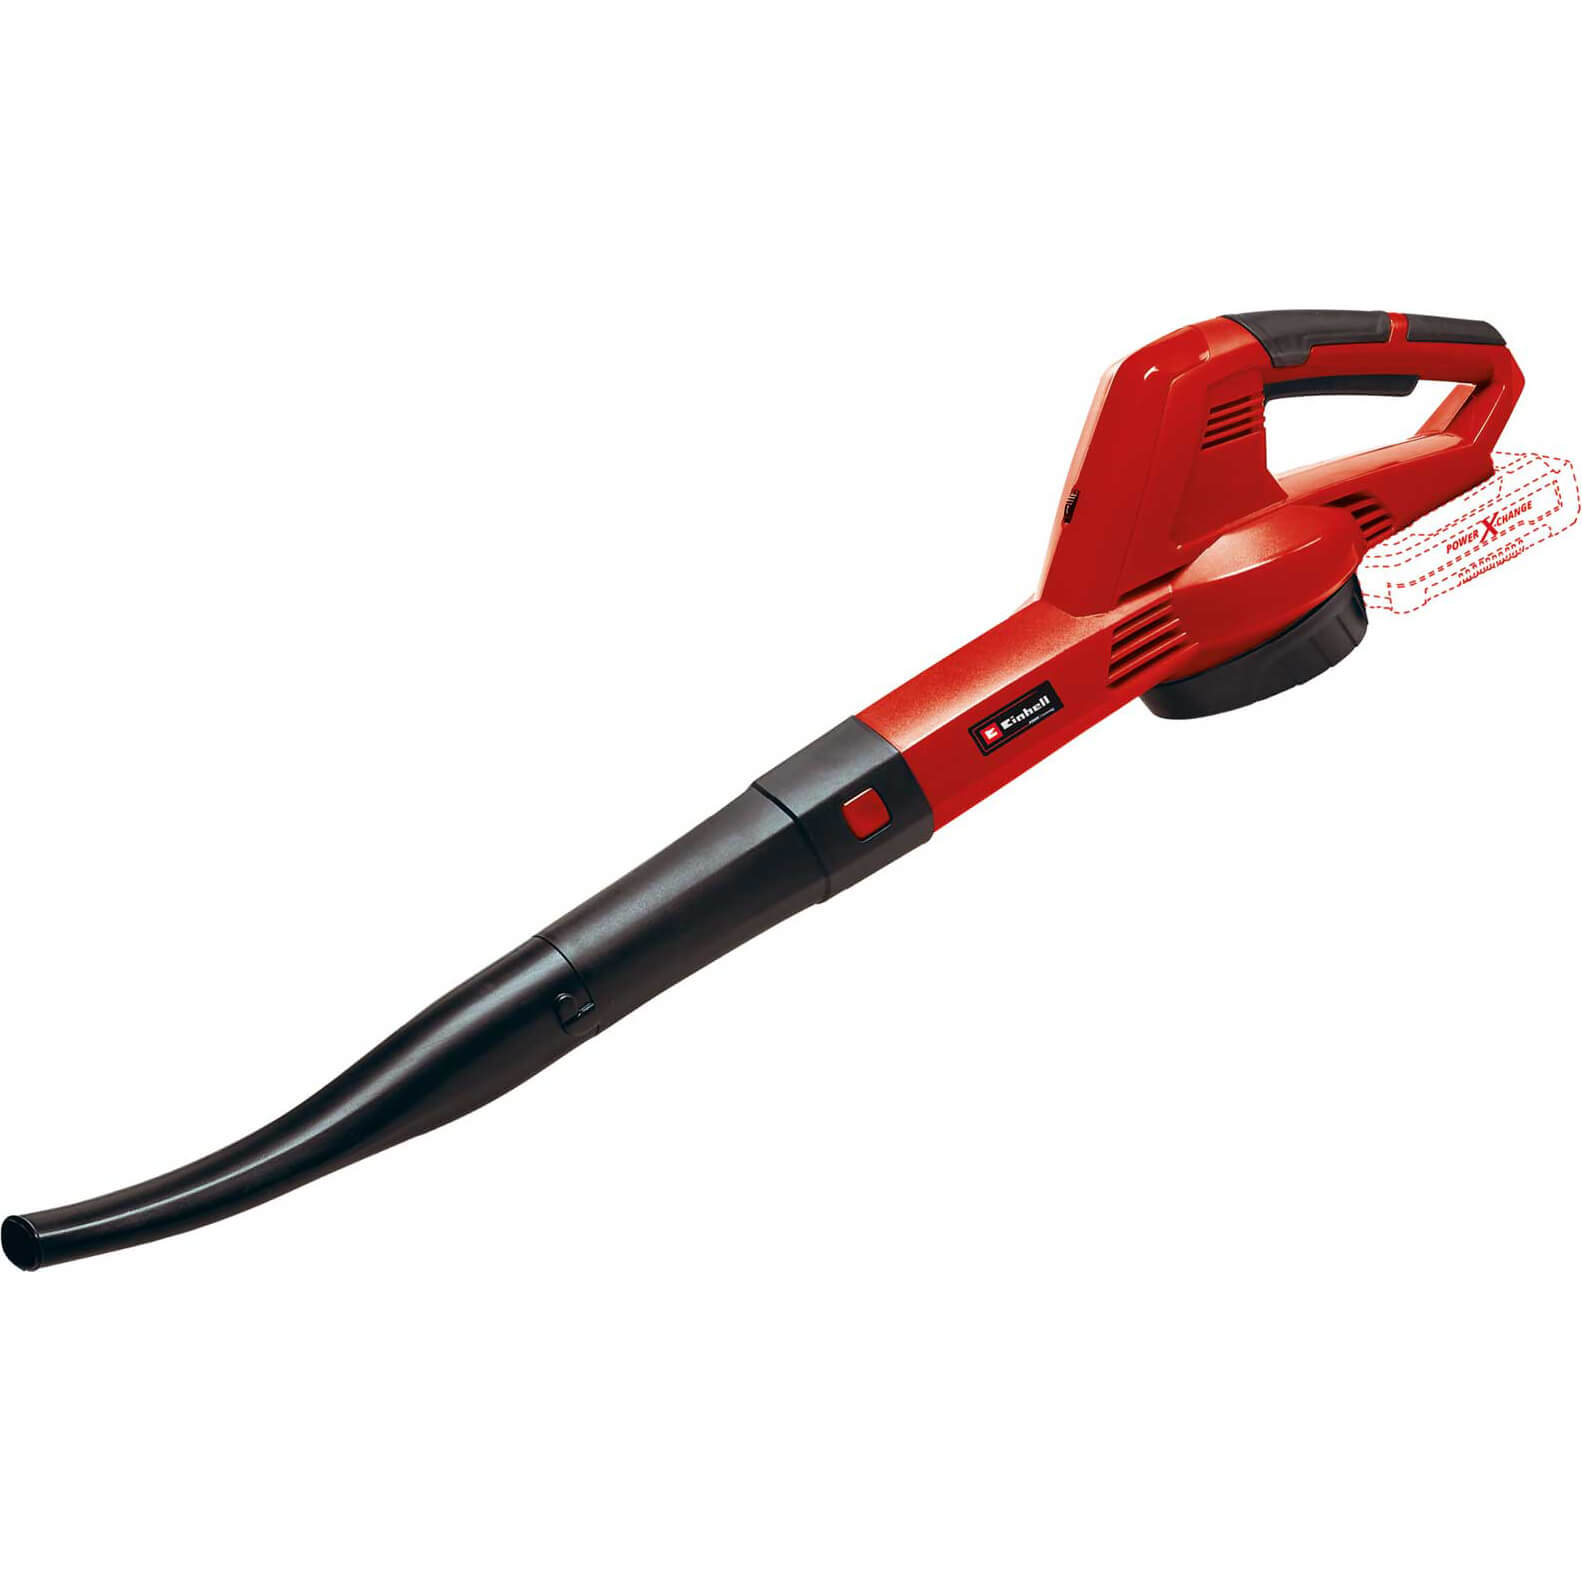 Image of Einhell GC-CL 18/1 Li E 18v Cordless Leaf Blower No Batteries No Charger